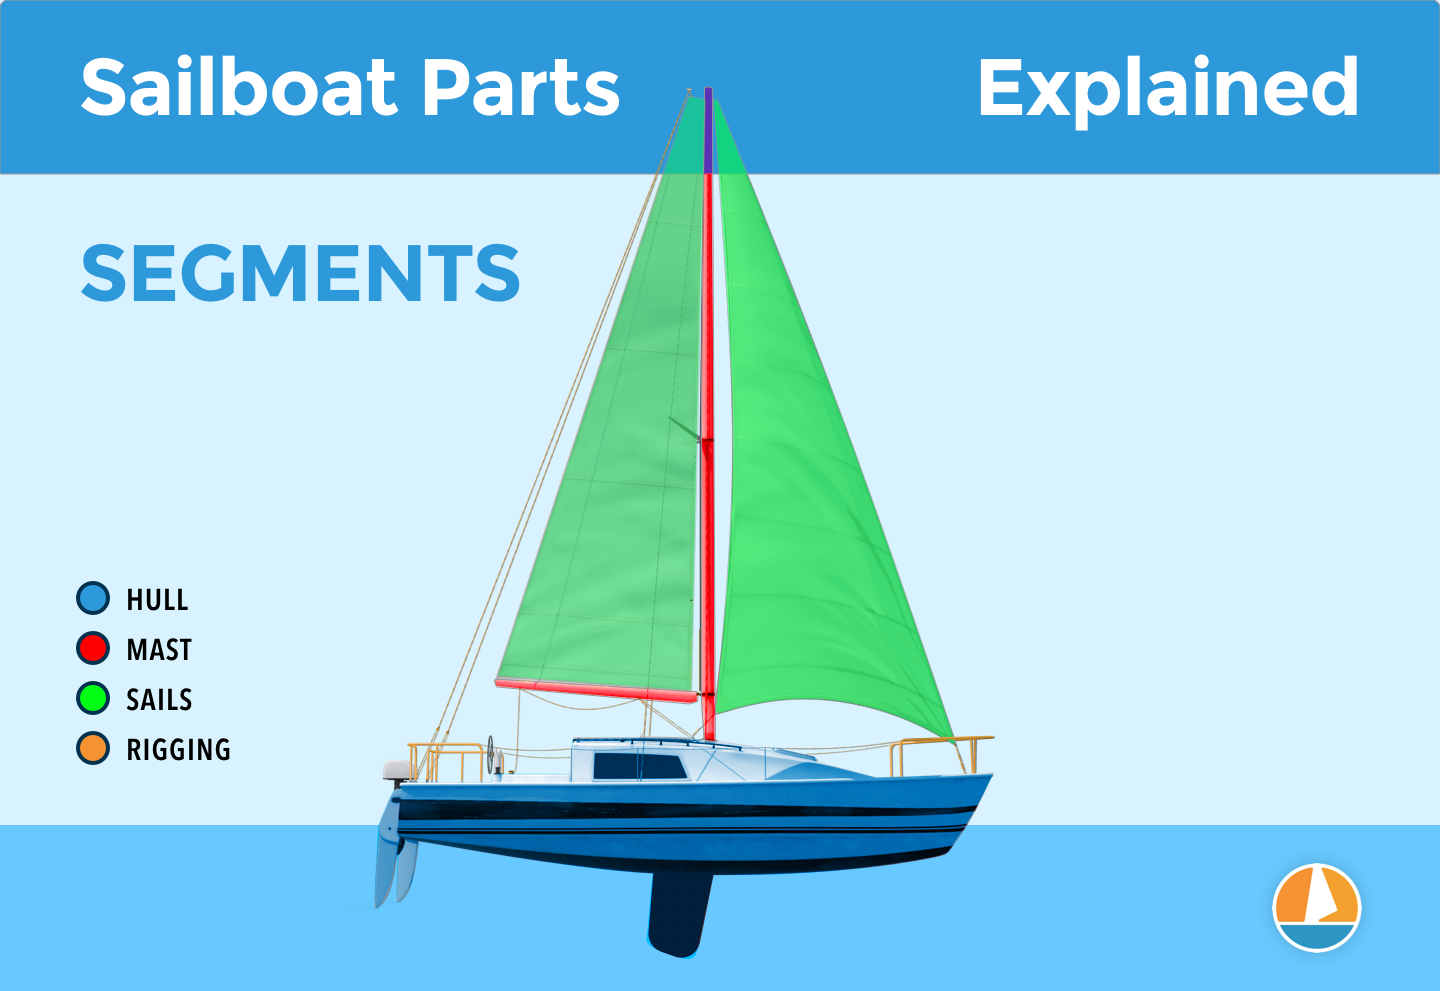 Sailboat Parts Explained: Illustrated Guide (with Diagrams)